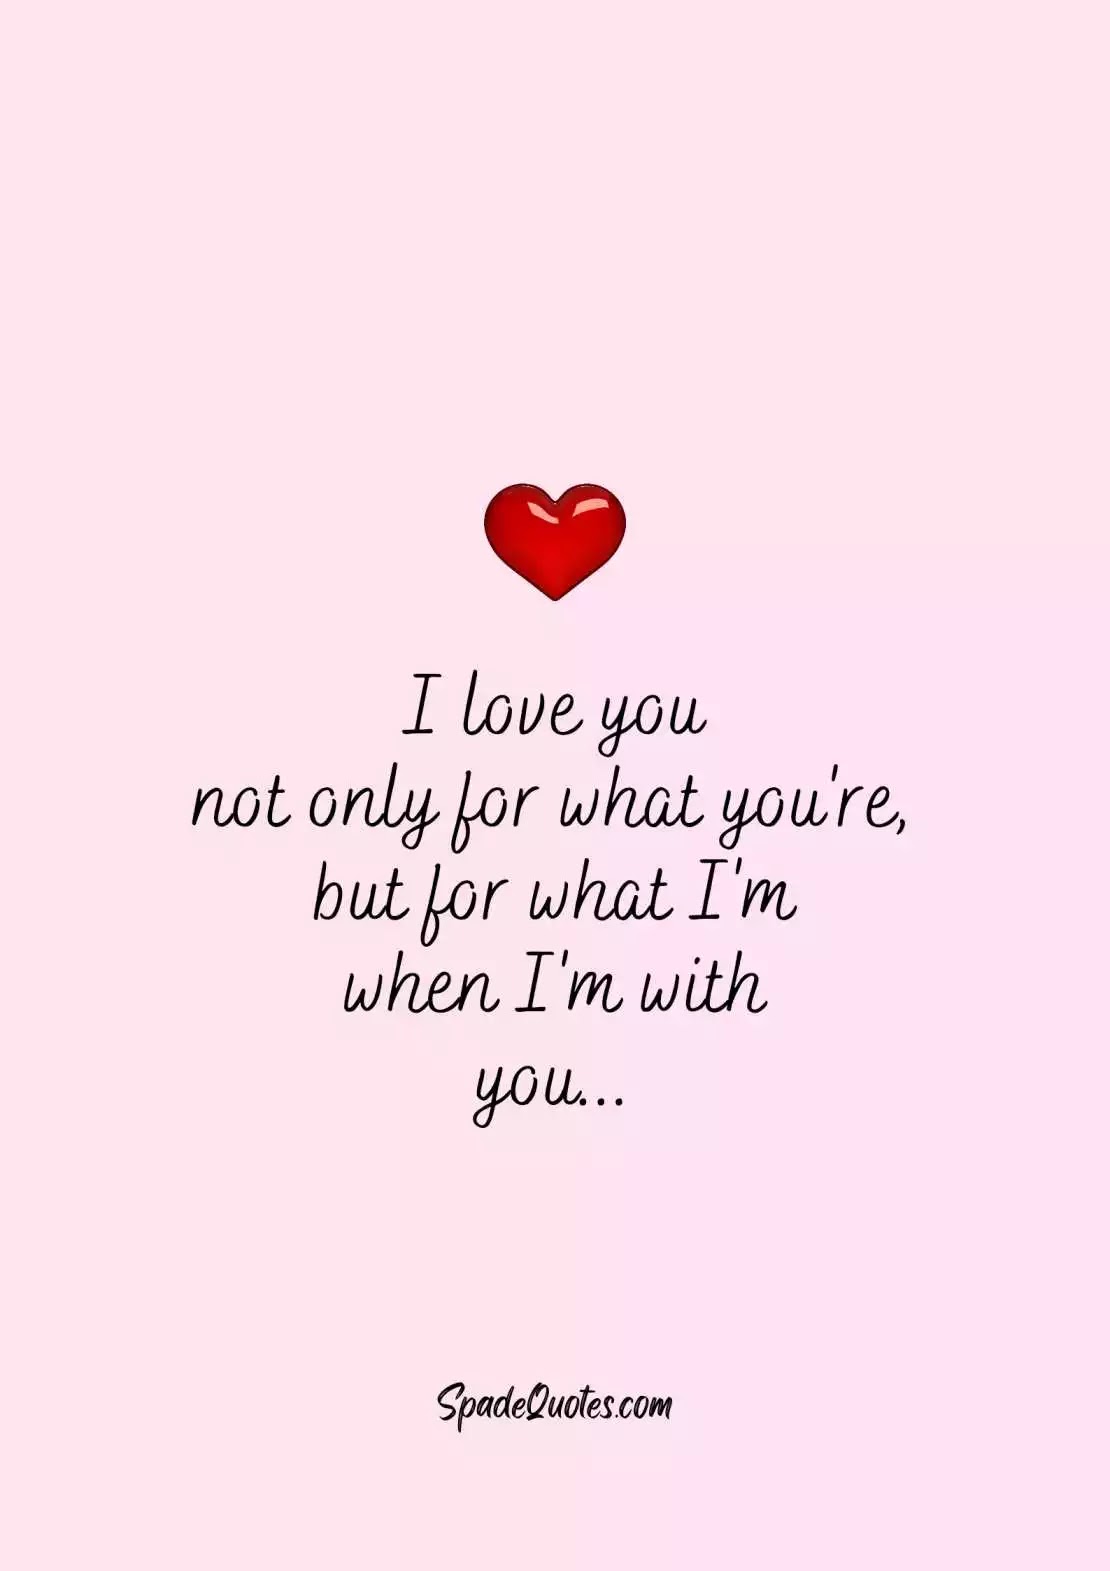 I-Love-you-Heart-Touching-Love-Quotes-for-Him-SpadeQuotes